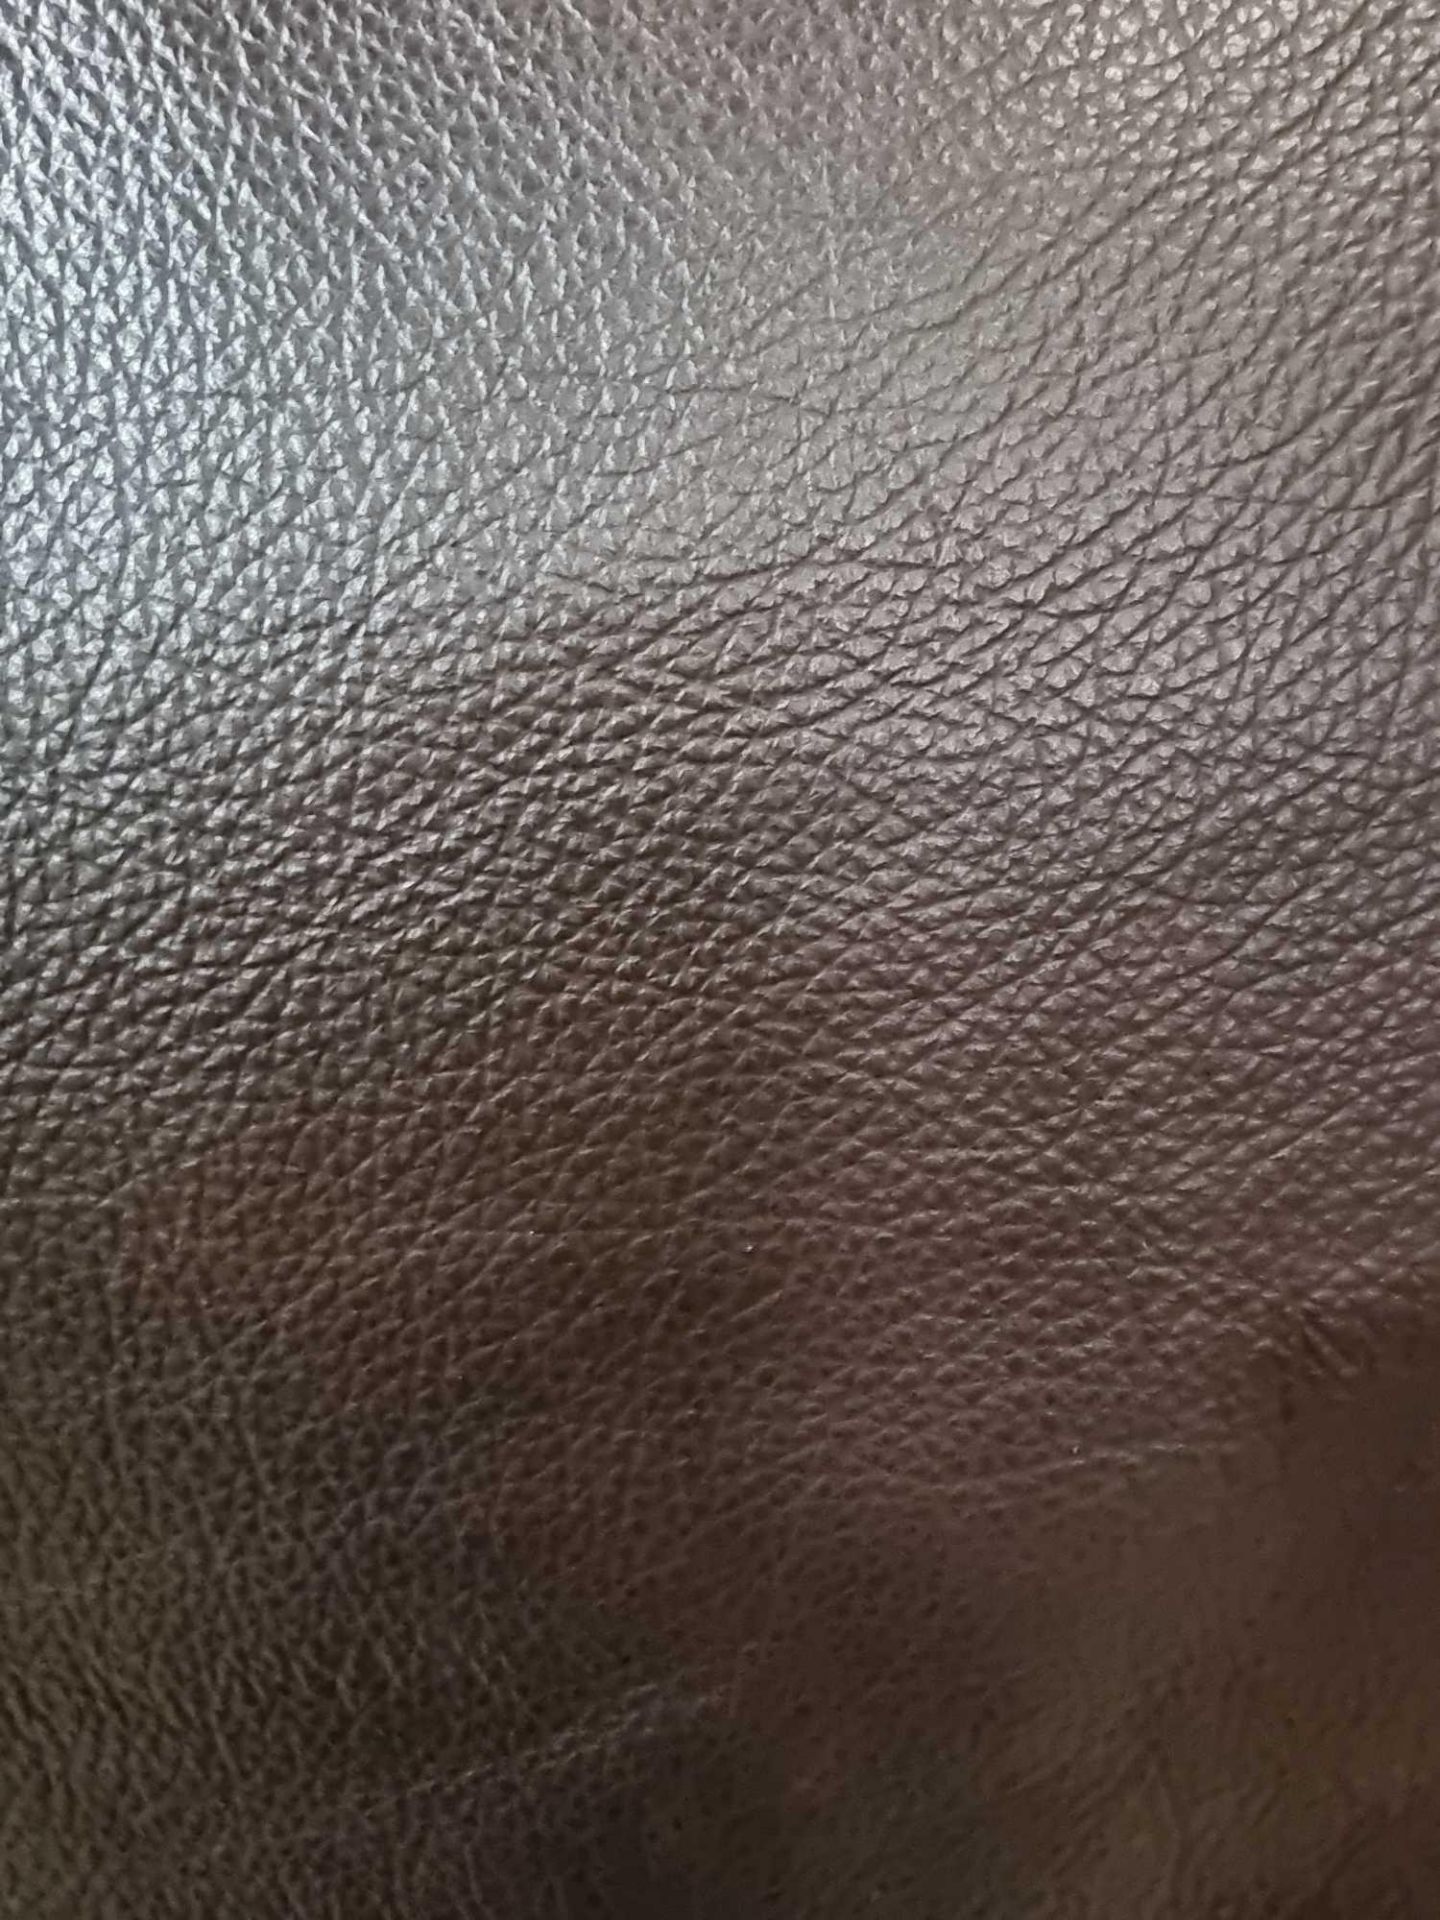 Mastrotto Hudson Chocolate Leather Hide approximately 4 94M2 2 6 x 1 9cm ( Hide No,111)